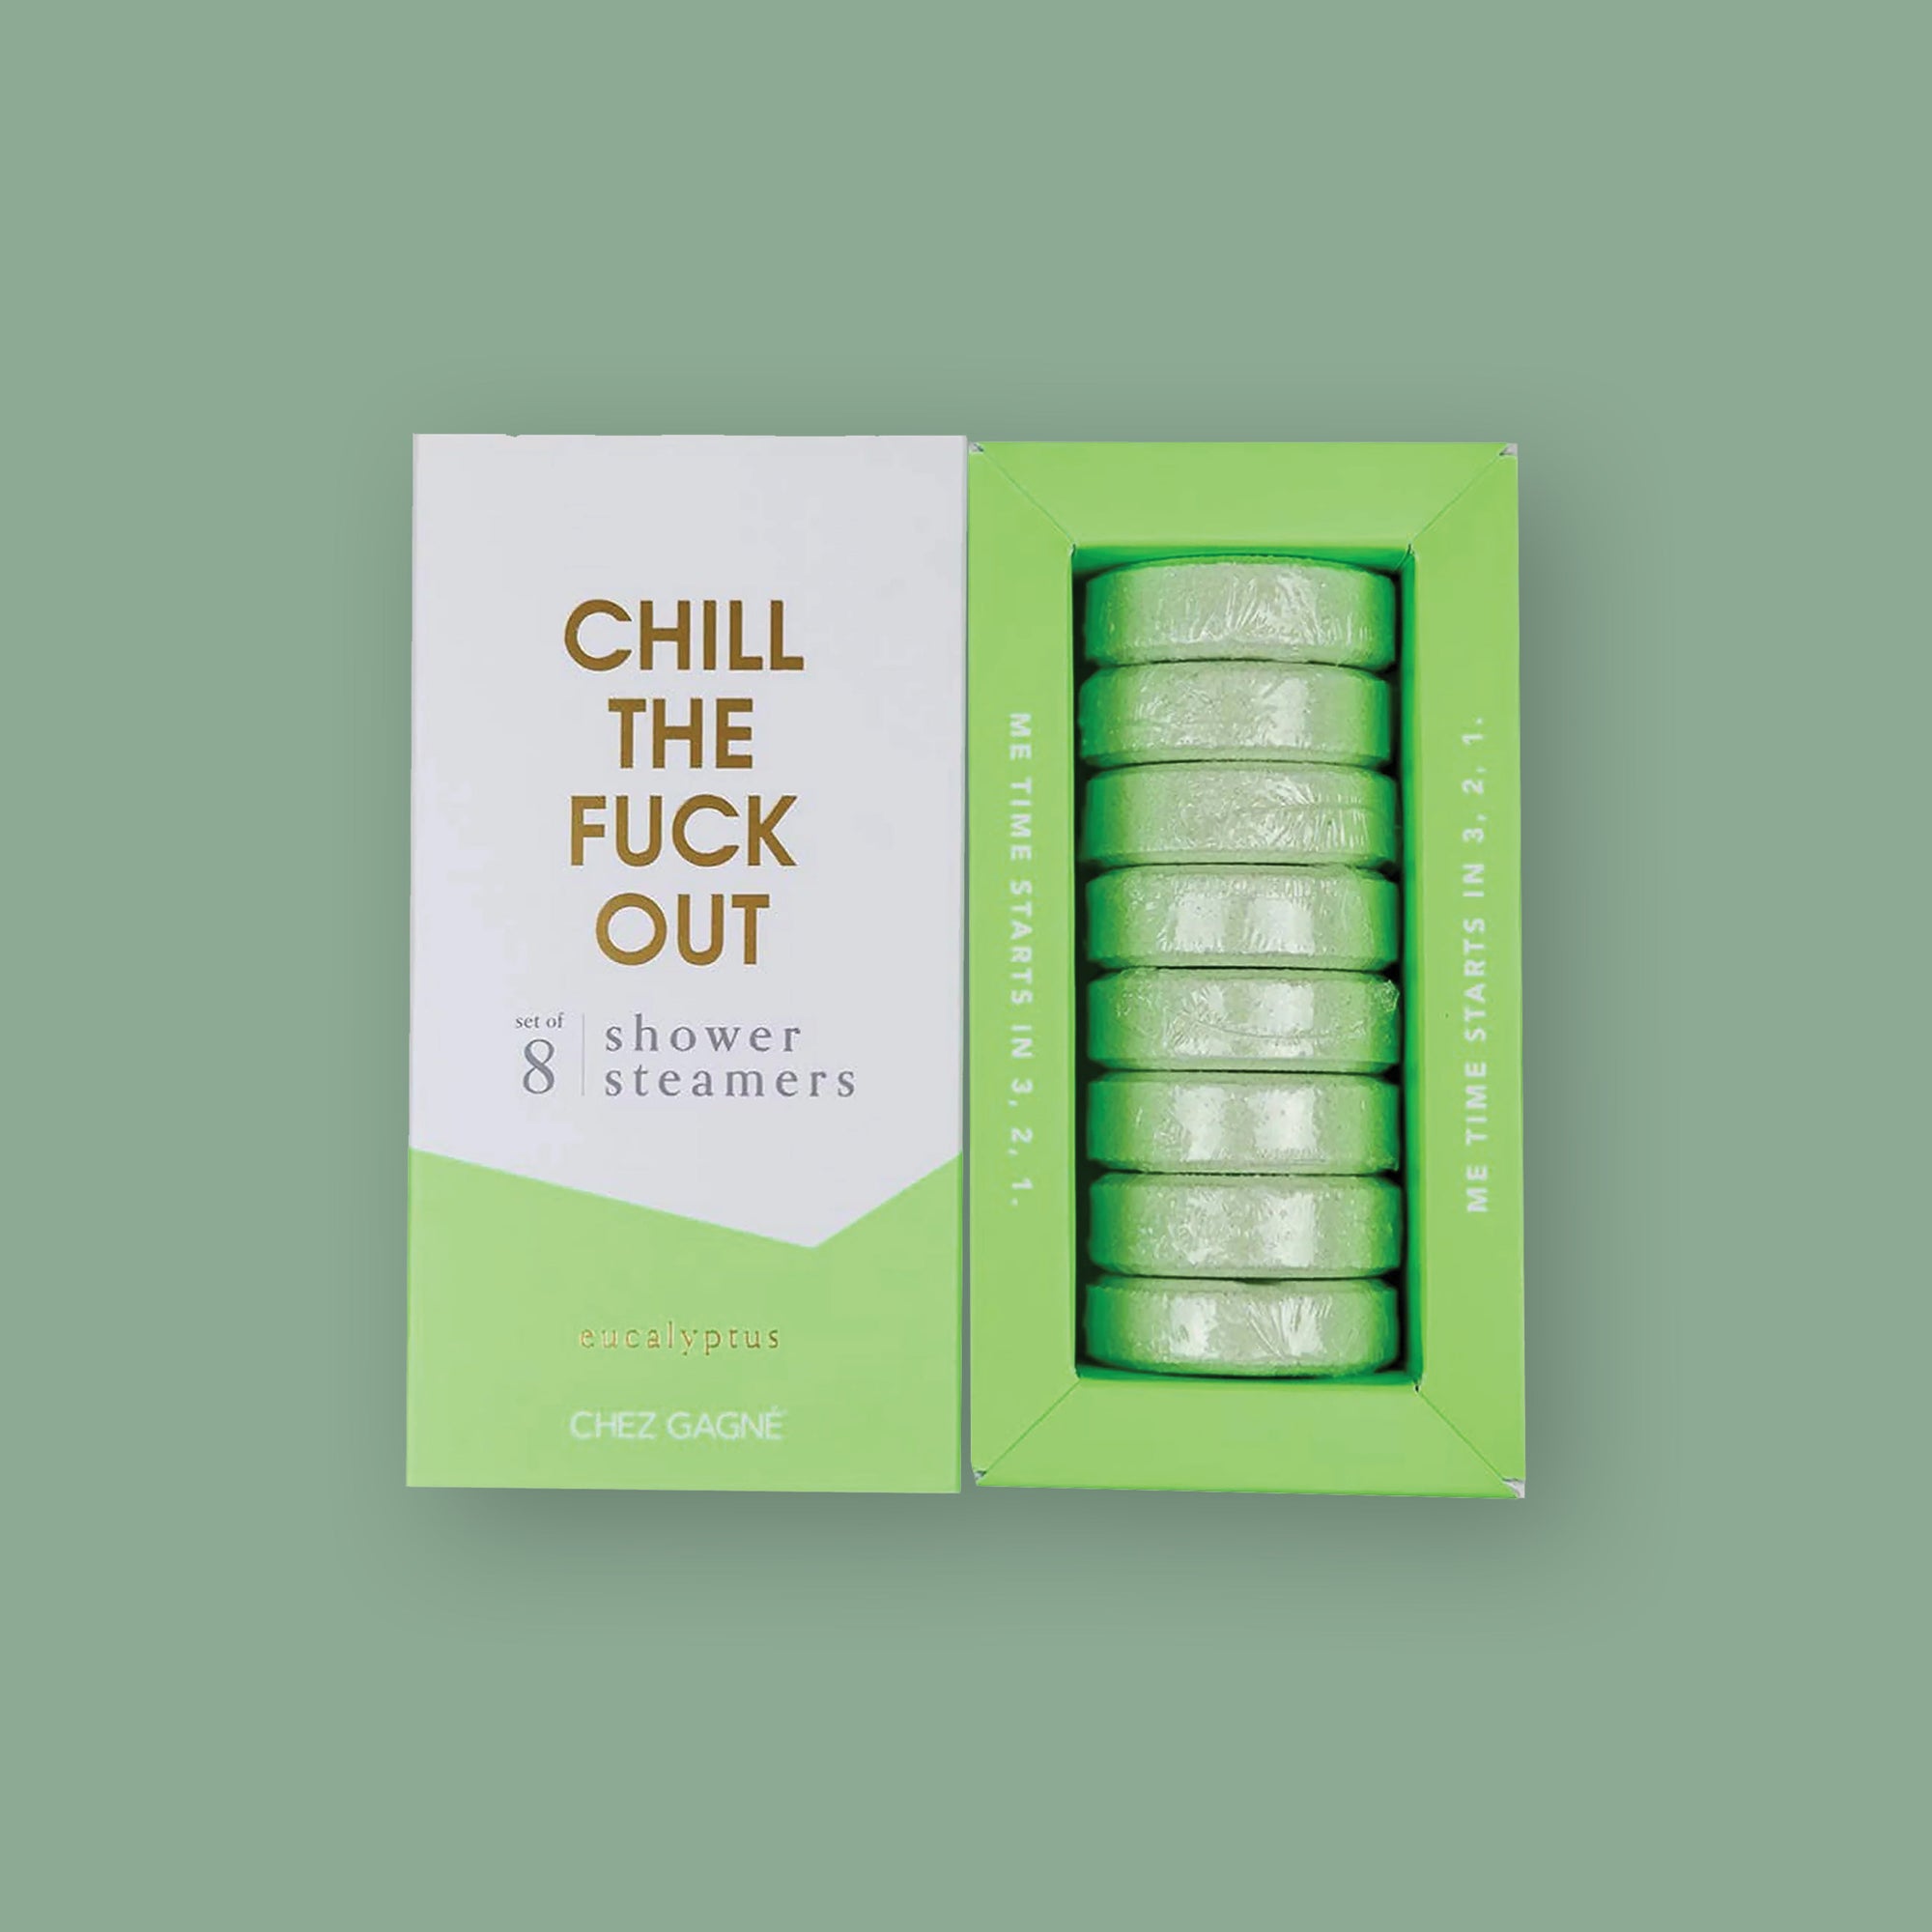 On a mossy green background sits two boxes. This picture is a close-up of a white and pistachio green package that says "CHILL THE FUCK OUT" in gold foil, all caps block lettering. Under it says "set of 8" and " shower steamers" in grey, lowercase serif font. At the bottom it says "eucalyptus" in gold foil, lower case serif font. To the right of it is a pistachio green box that is out of focus and has pistachio green shower steamers in it.